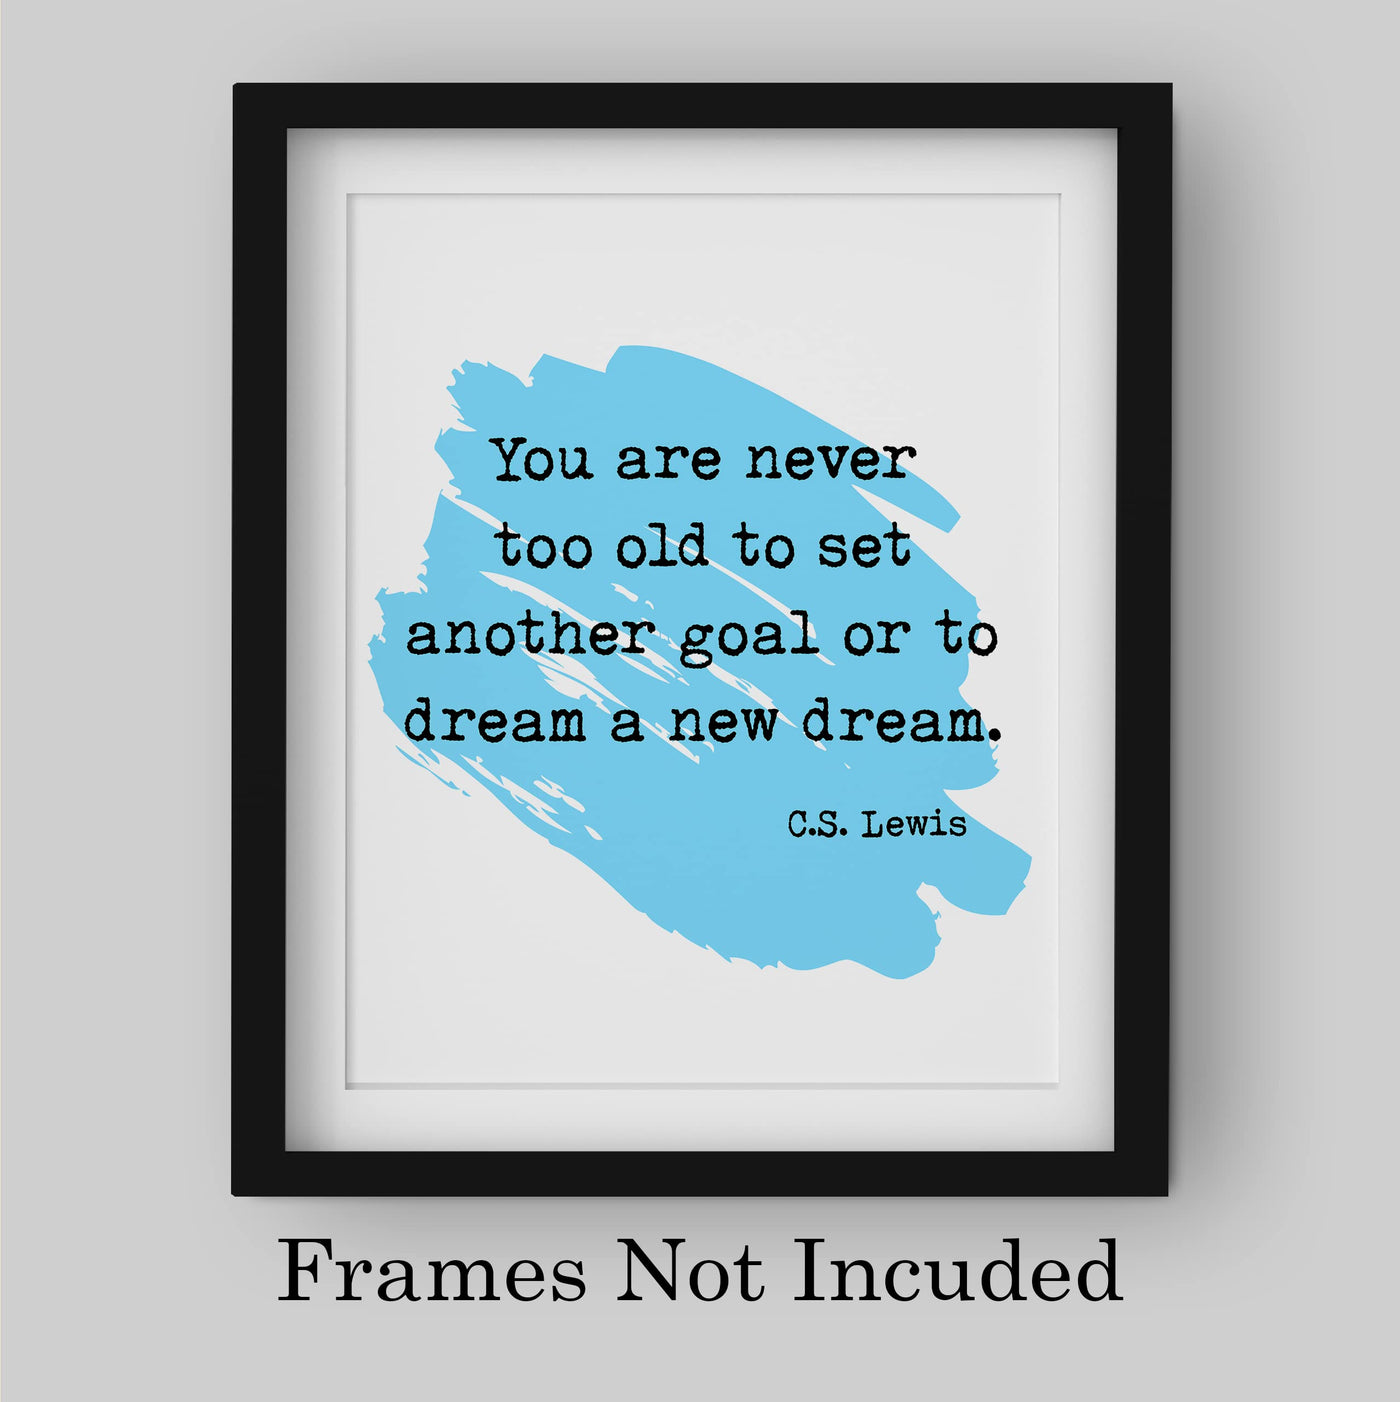 C.S. Lewis Quotes Wall Art -"Never Too Old to Set Another Goal"- 8 x 10" Inspirational Painting Design Print -Ready to Frame. Modern Home-Office-School-Christian Decor. Great Motivational Gift!